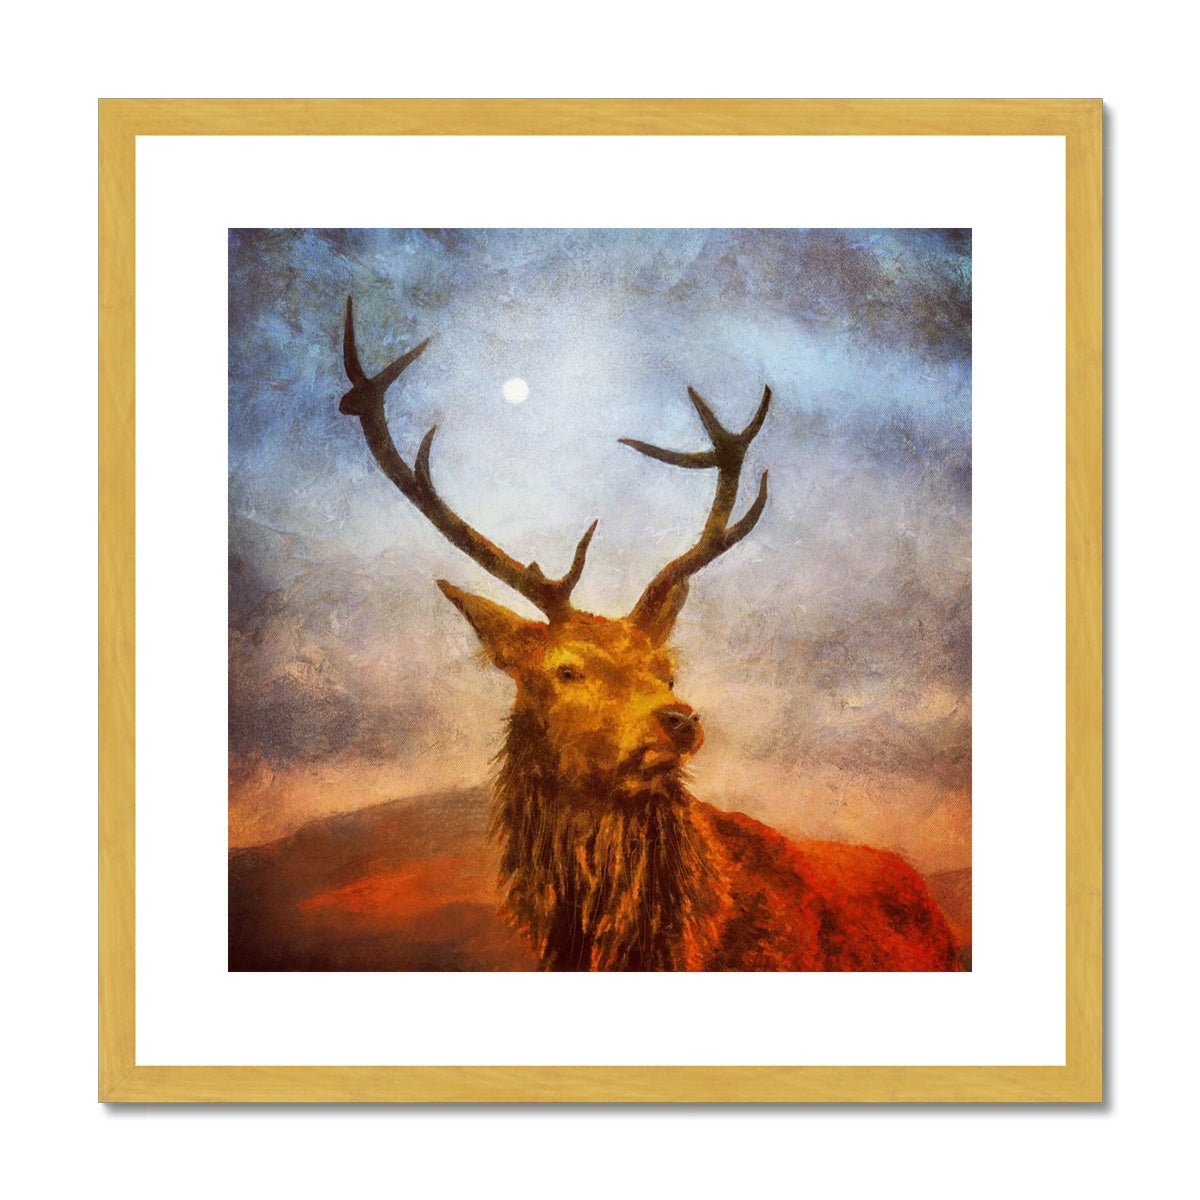 A Moonlit Highland Stag Painting | Antique Framed & Mounted Prints From Scotland-Antique Framed & Mounted Prints-Scottish Highlands & Lowlands Art Gallery-20"x20"-Gold Frame-Paintings, Prints, Homeware, Art Gifts From Scotland By Scottish Artist Kevin Hunter